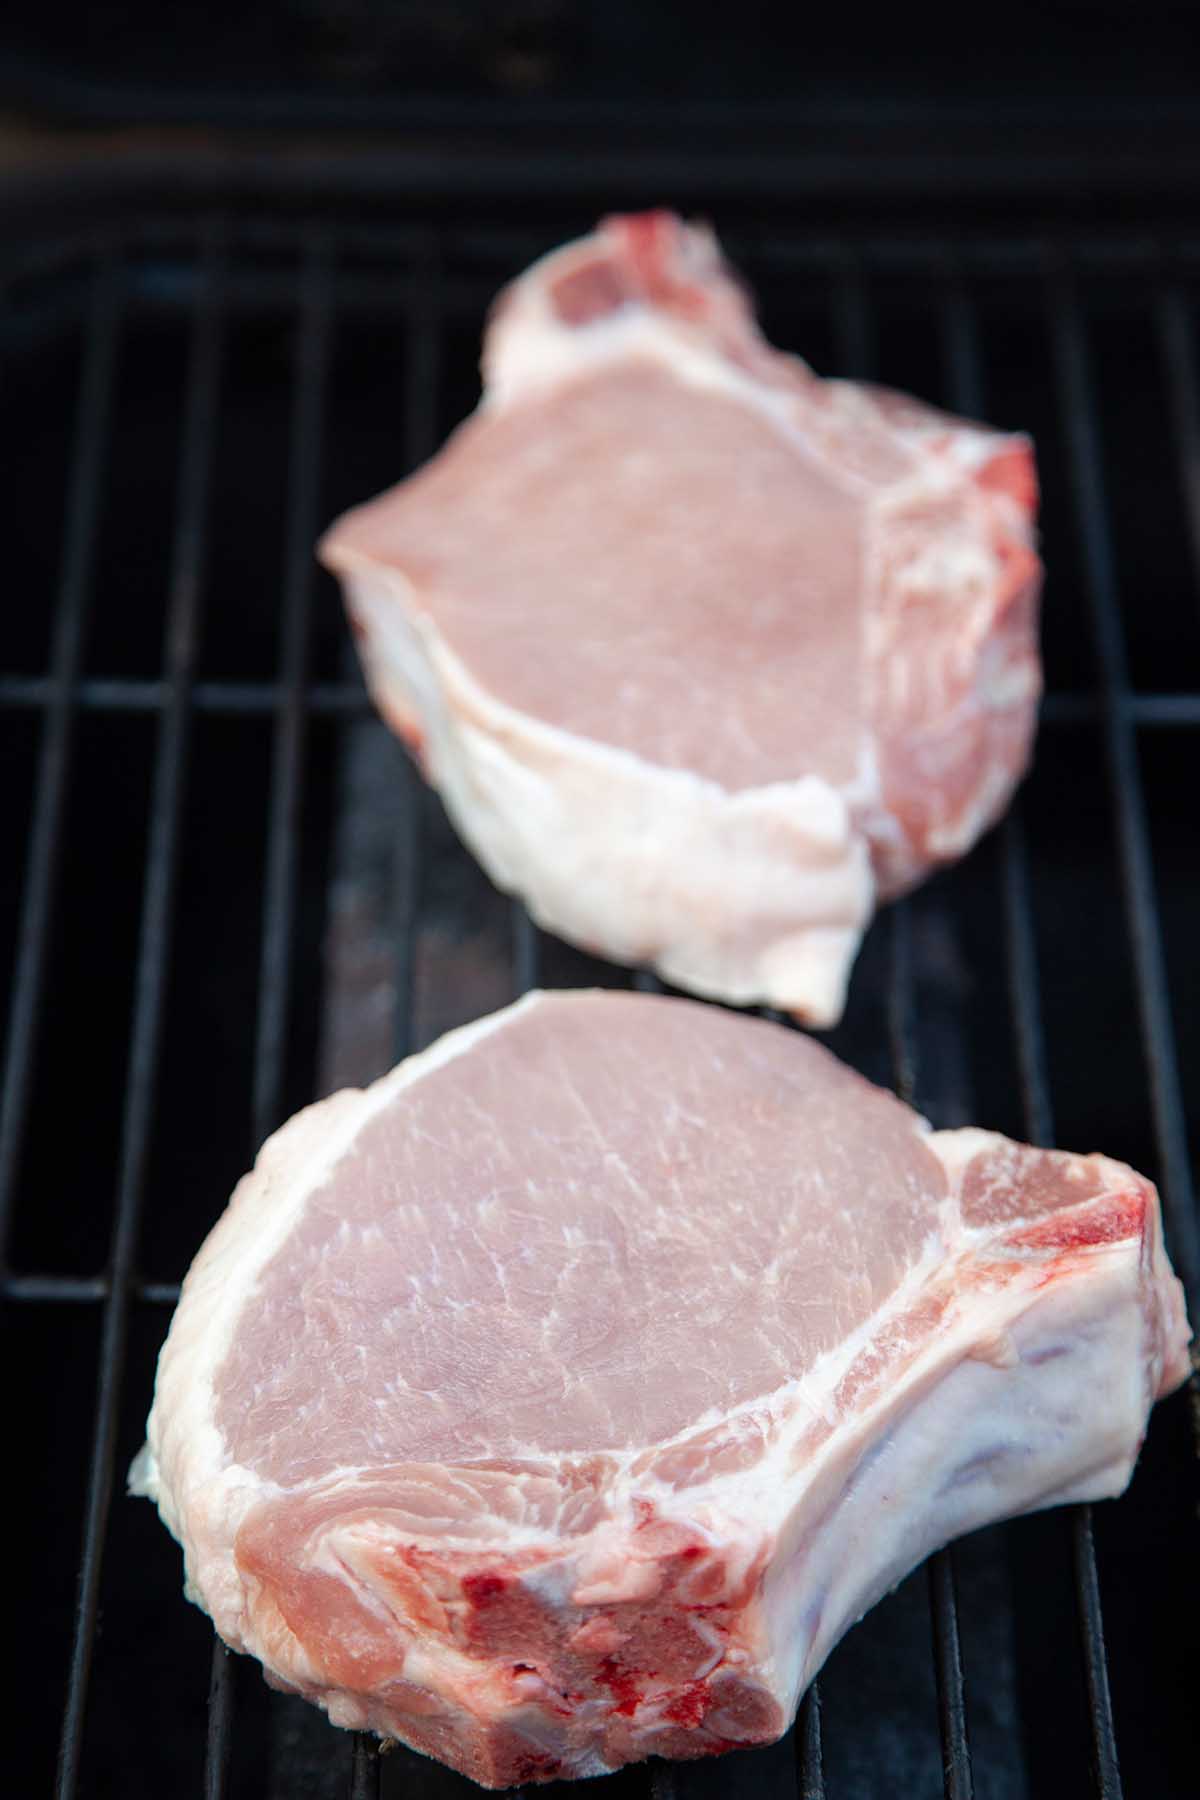 Grilling thick pork chops